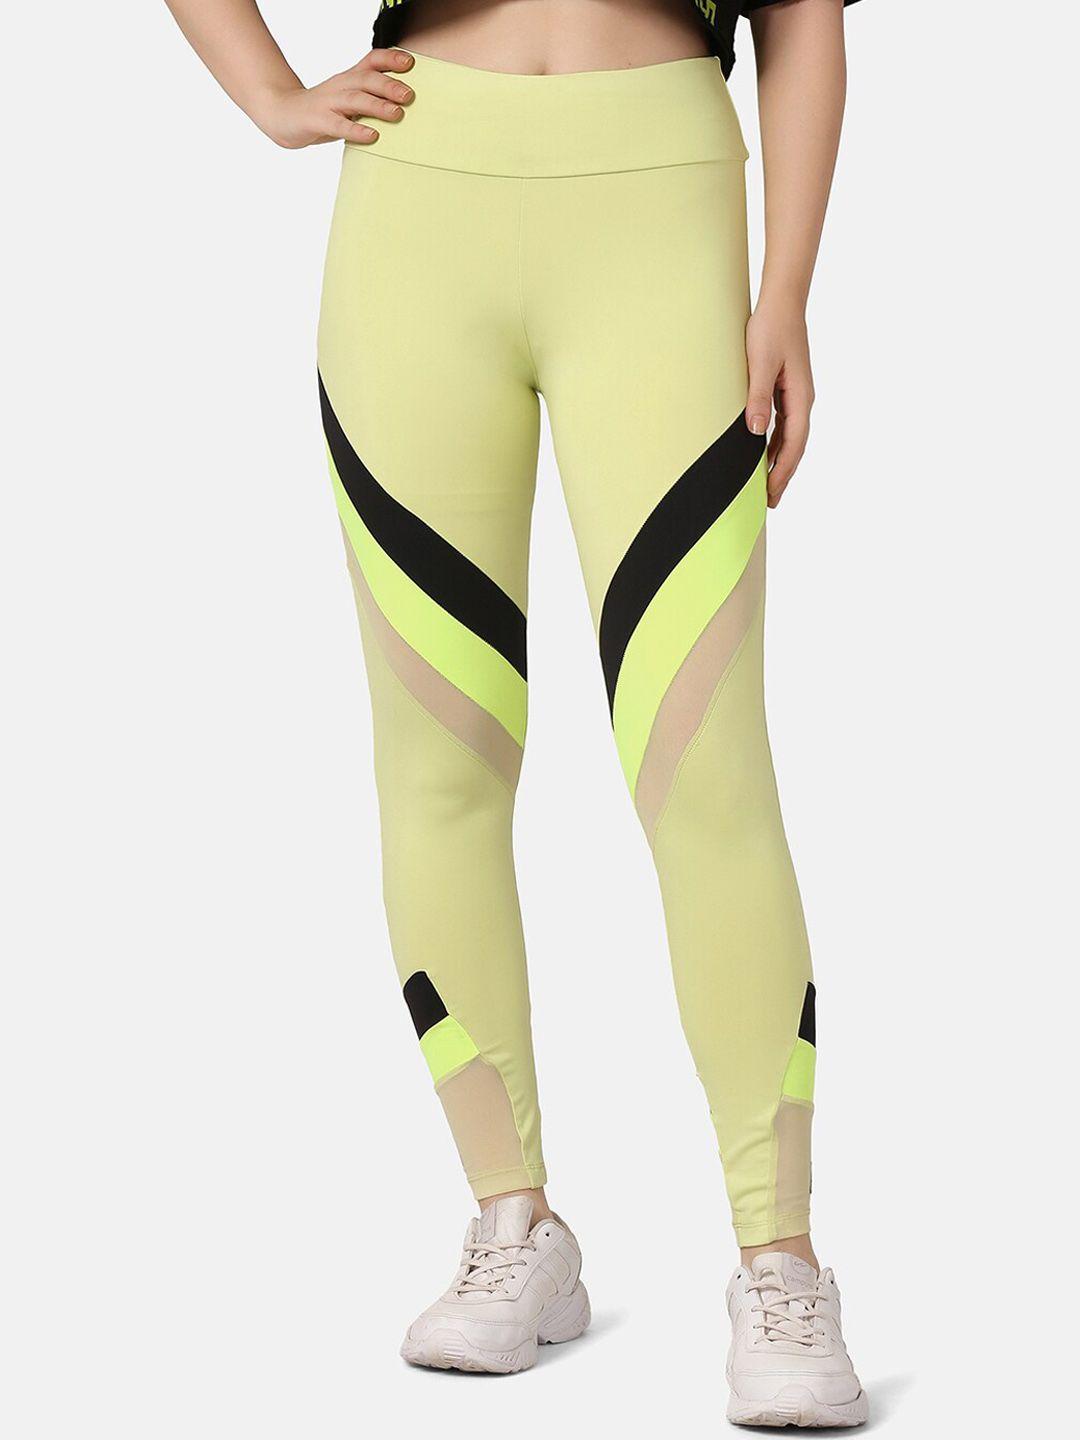 aesthetic bodies women fluorescent green striped sports tights